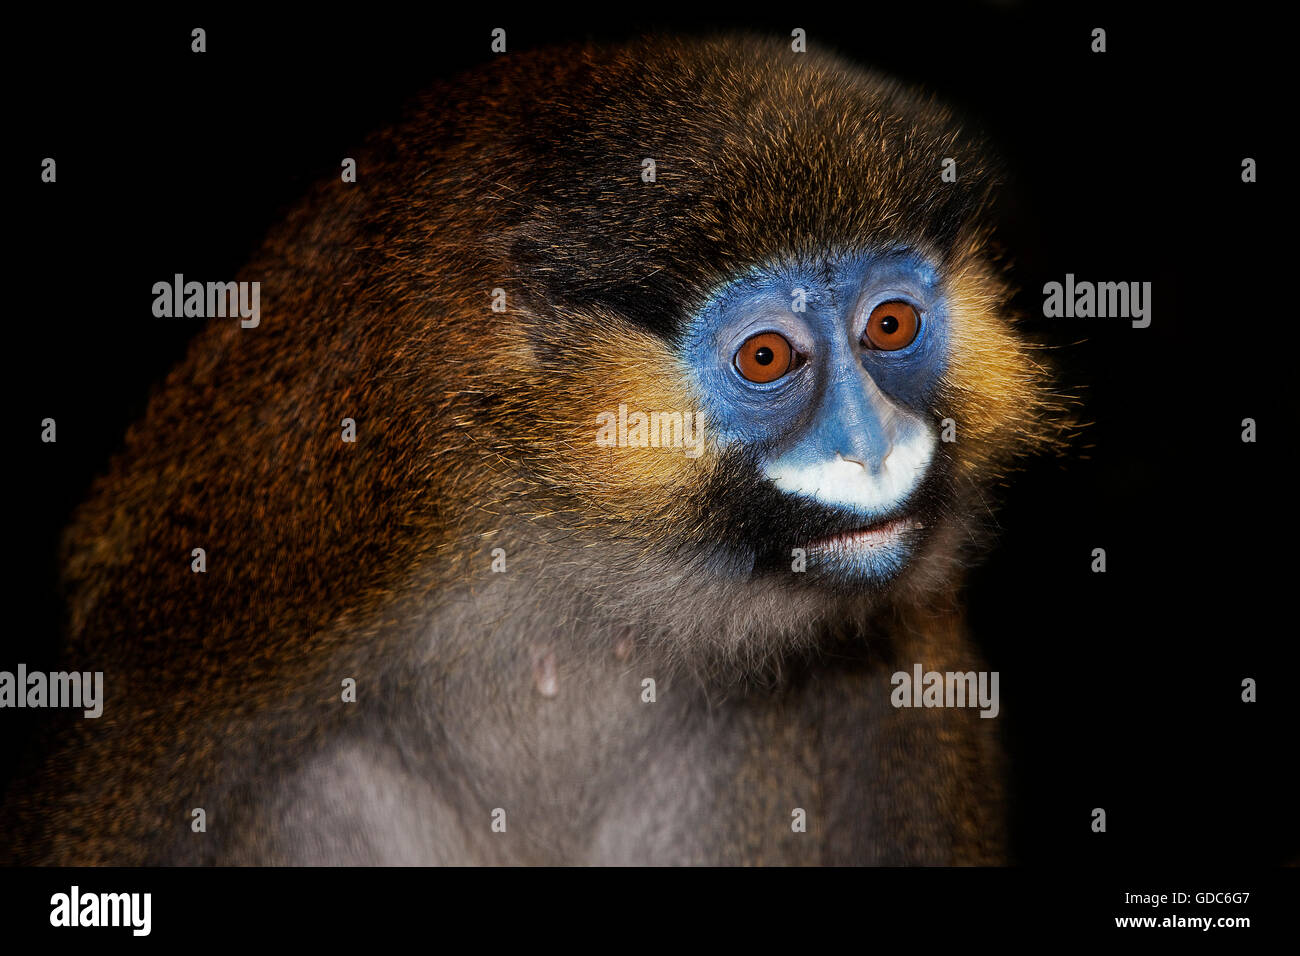 HEAD CLOSE-UP OF MOUSTACHED MONKEY OR MUSTACHED MONKEY cercopithecus cephus AGAINST BLACK BACKGROUND Stock Photo